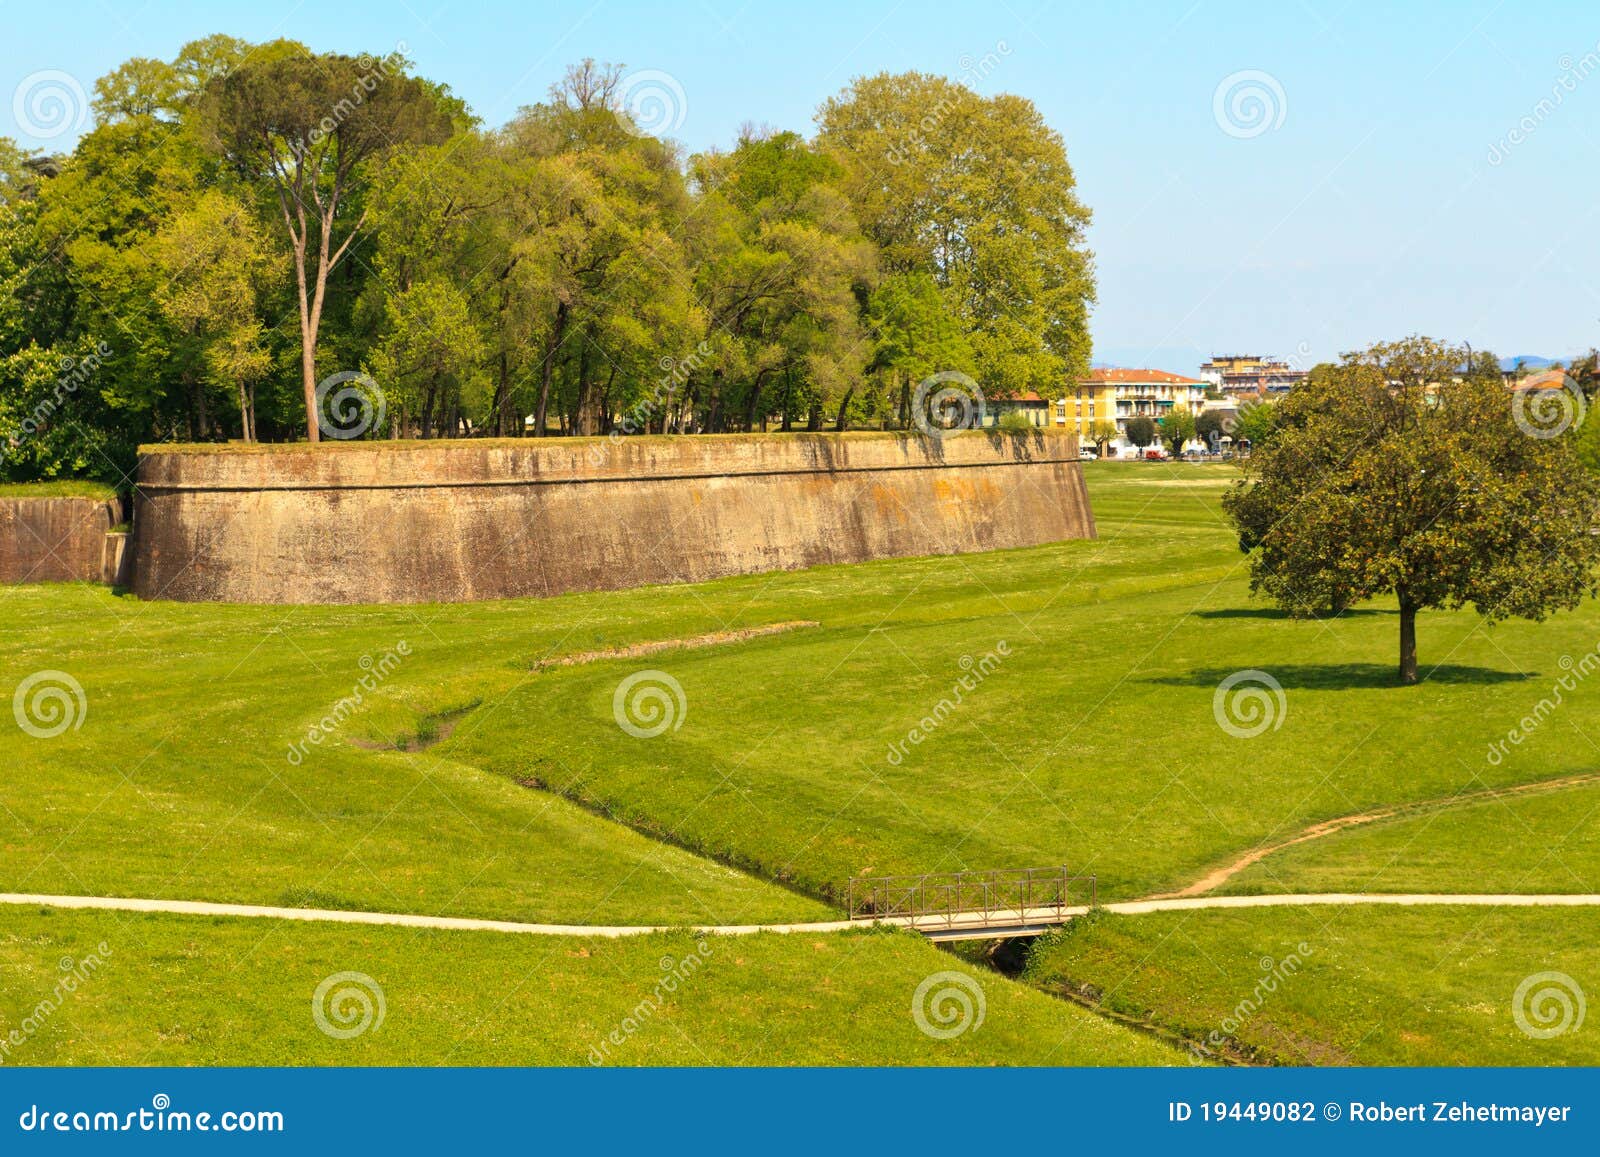 Lucca City Wall Fortifications Stock Photo - Image of defend, facade ...